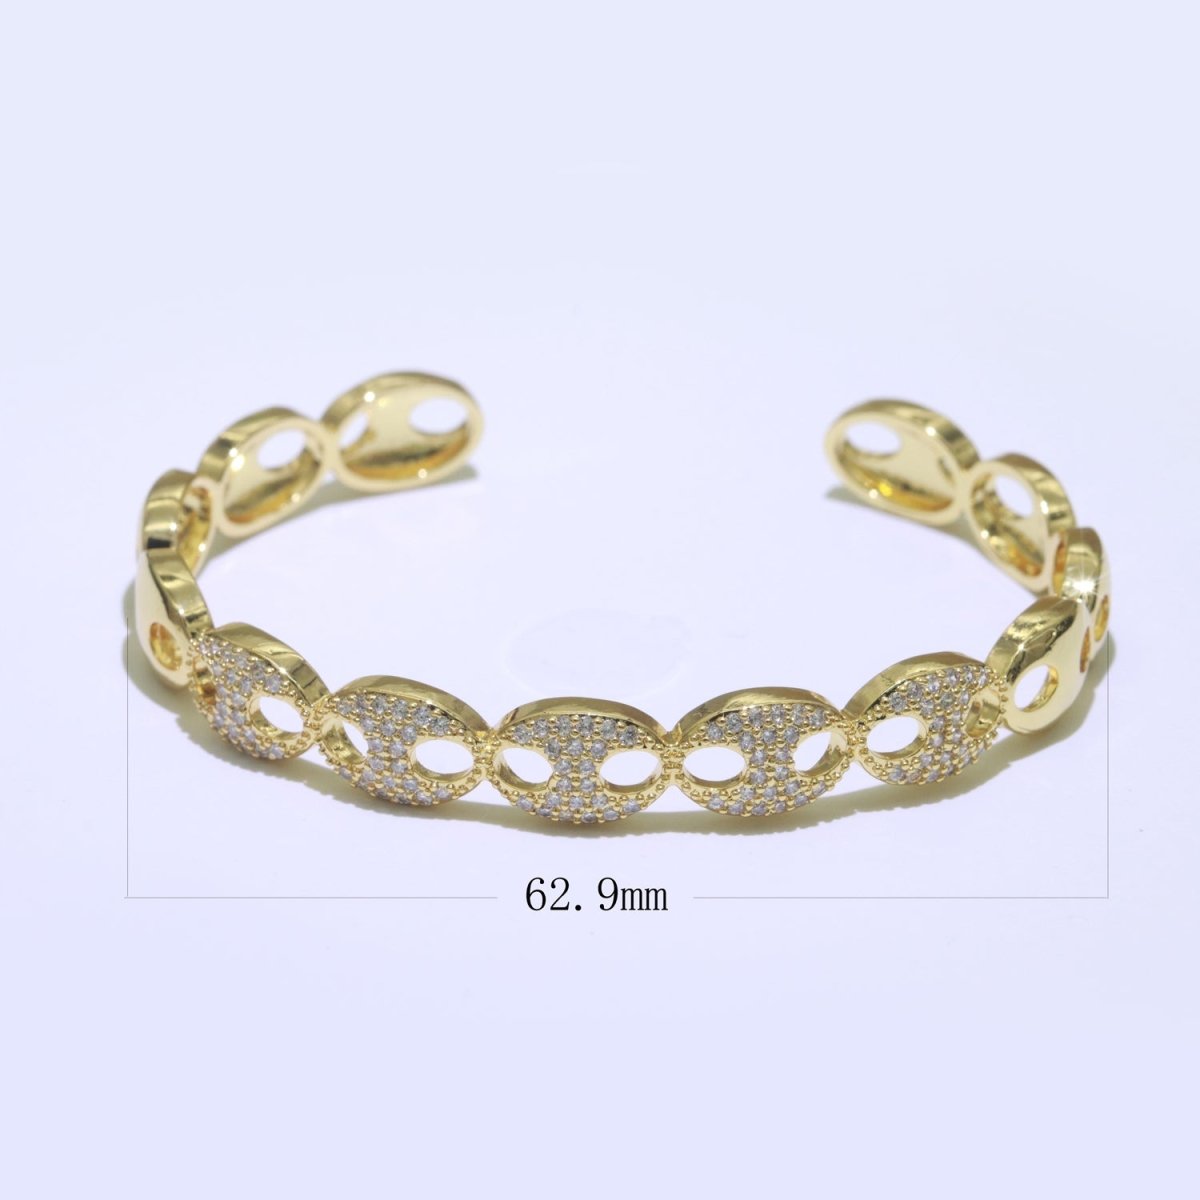 Dainty Gold Filled Anchor Link Bangle Bracelet, 14K Gold Filled Designer Inspired Gold Bracelet Adjustable Cuff Bracelet | WA-128 Clearance Pricing - DLUXCA